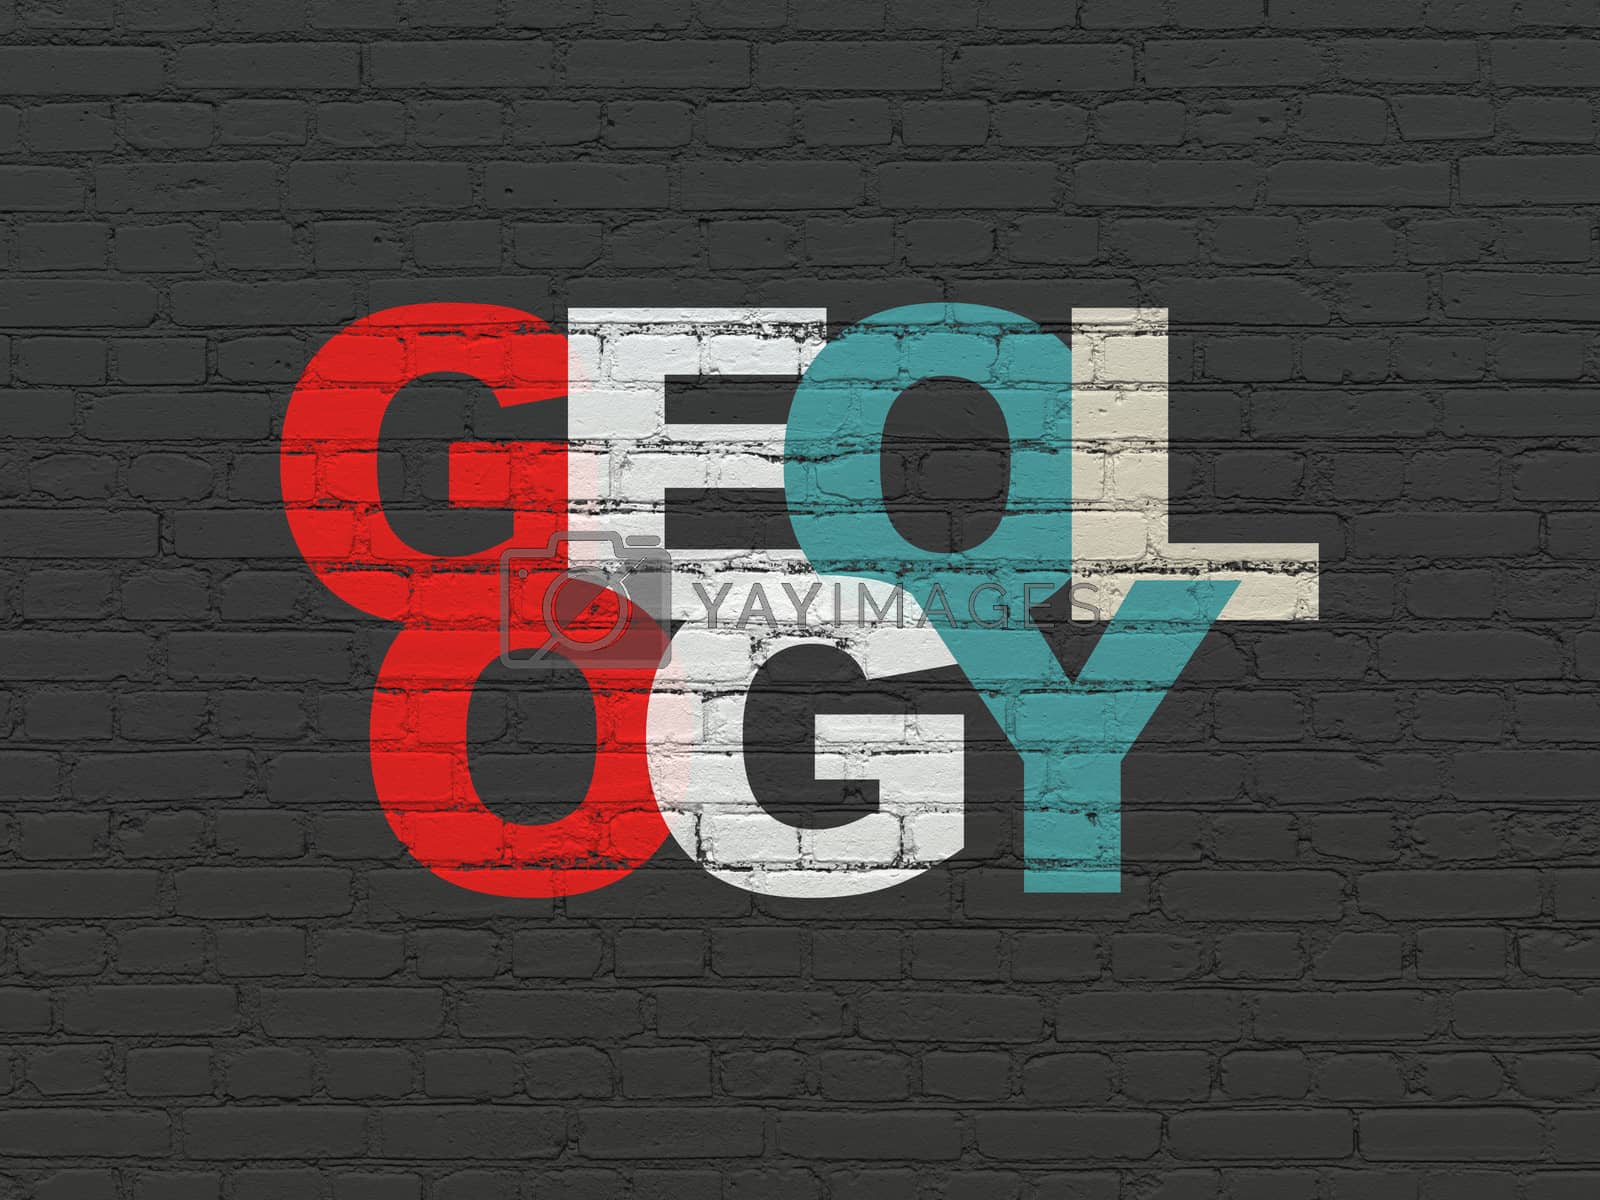 Royalty free image of Learning concept: Geology on wall background by maxkabakov